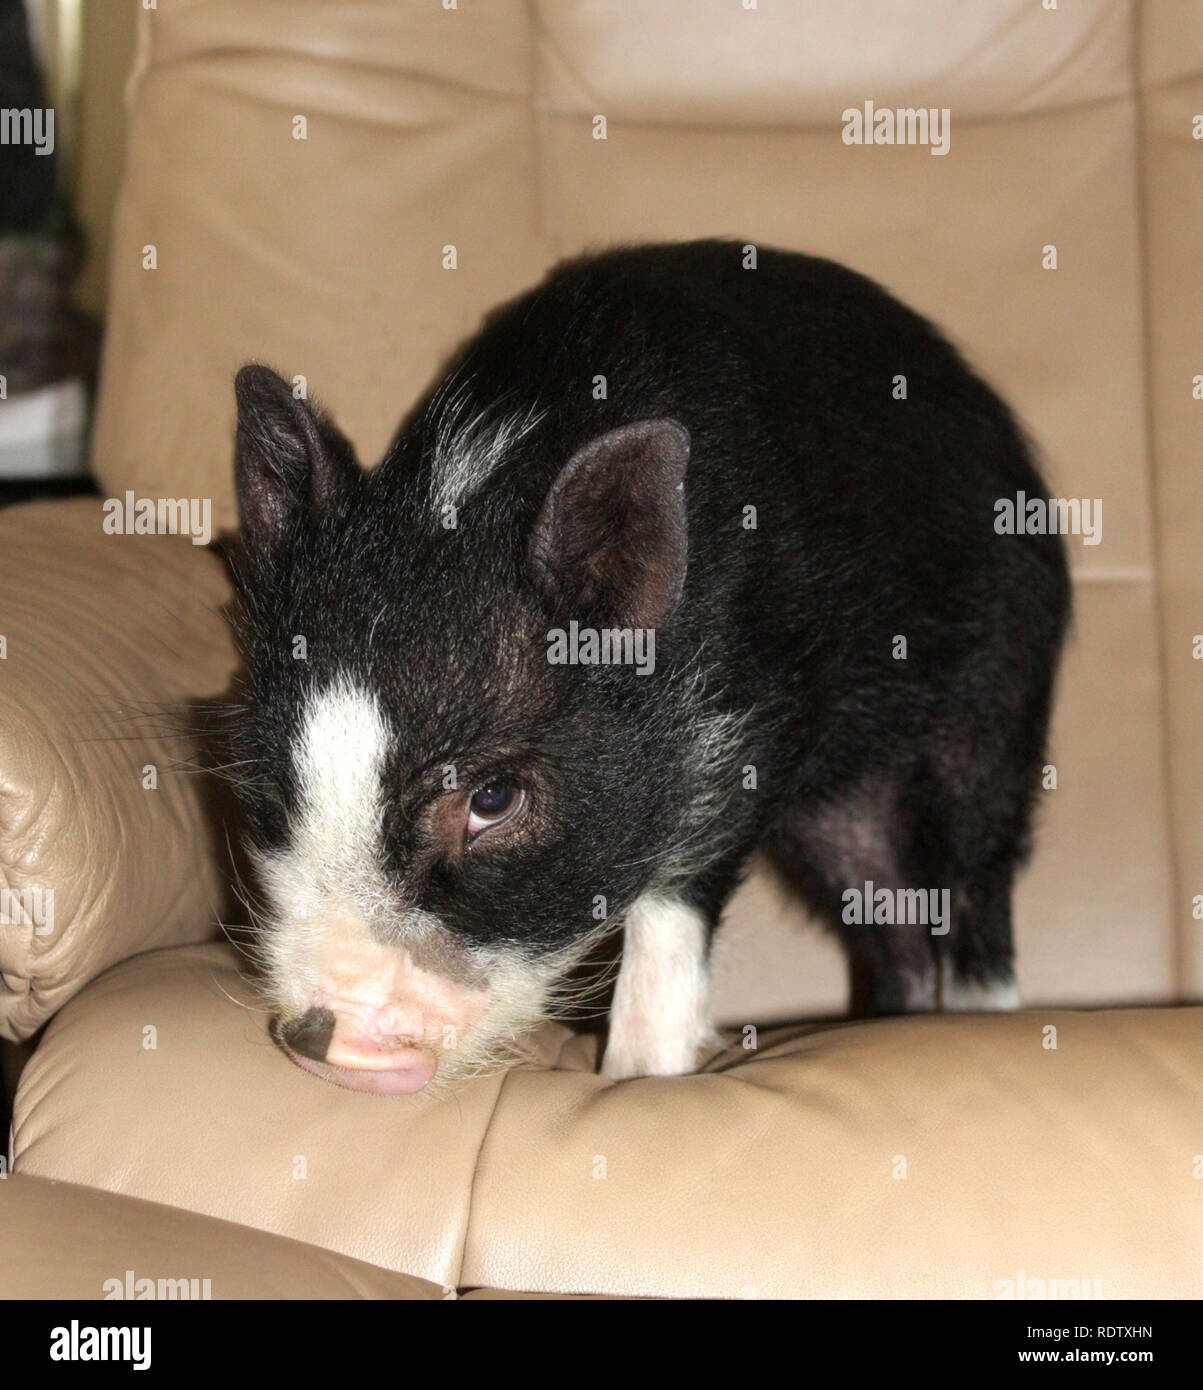 A Vietnamese Pot Belly pig looking guilty Stock Photo